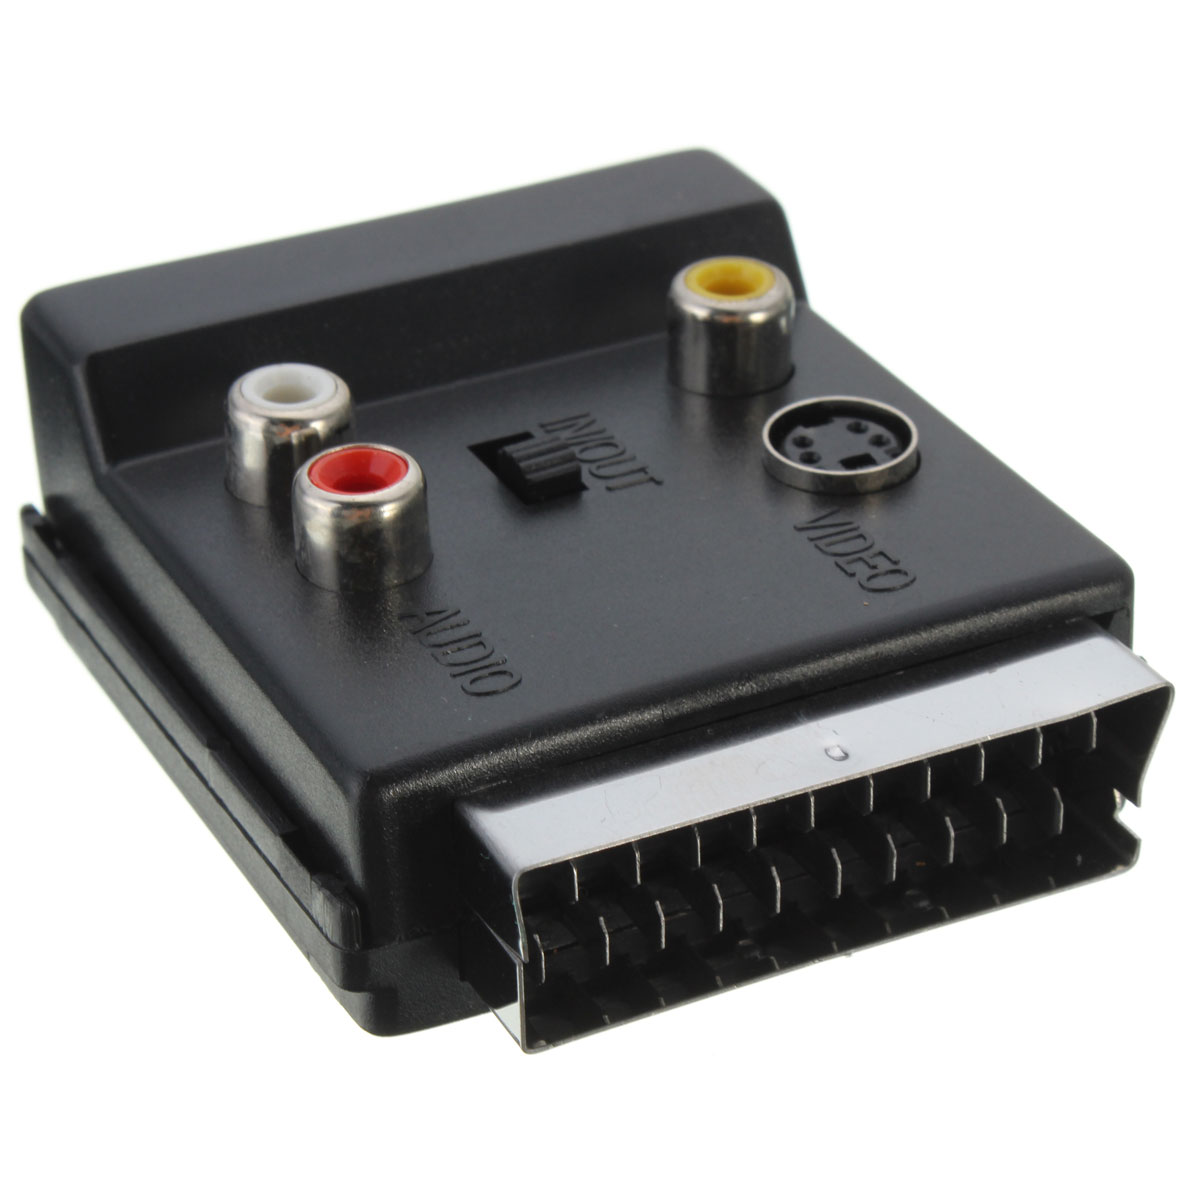 

Switchable Scart Male to Scart Female S-Video 3 RCA Audio Adapter Converter Connector